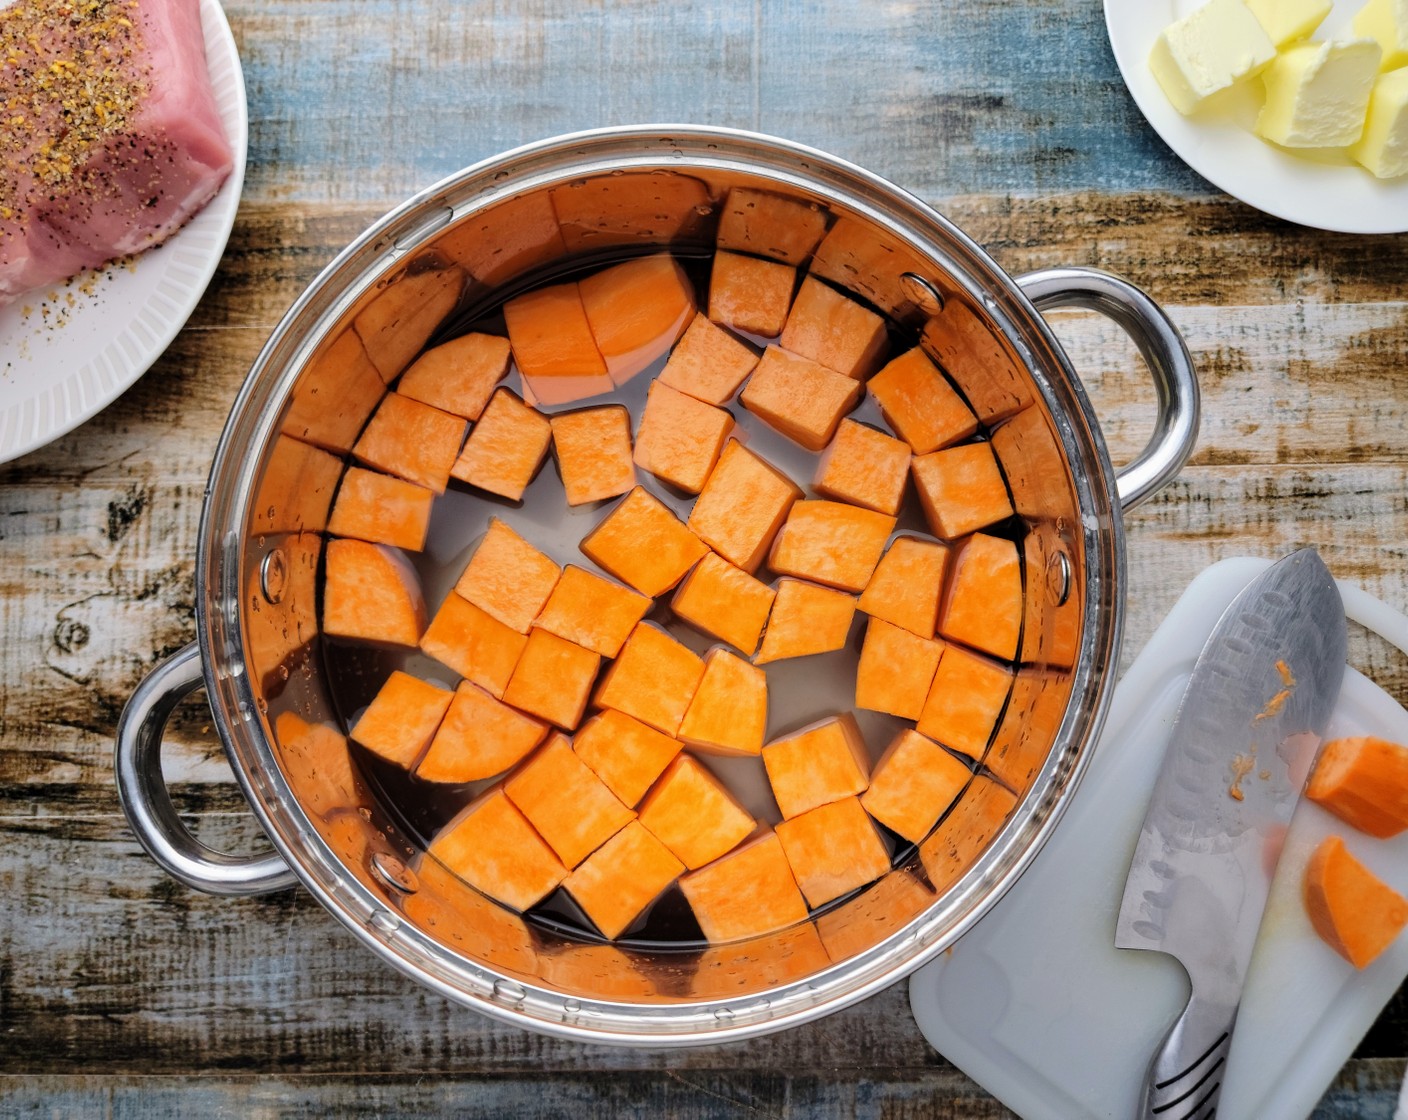 step 2 Peel and dice the Sweet Potatoes (1.3 lb) into ½ inch pieces. Place the potatoes into a medium-sized pot and cover with water. Bring the pot to a boil over high heat, then reduce it to a simmer and cook for about 20 minutes. The sweet potatoes should be fork-tender.